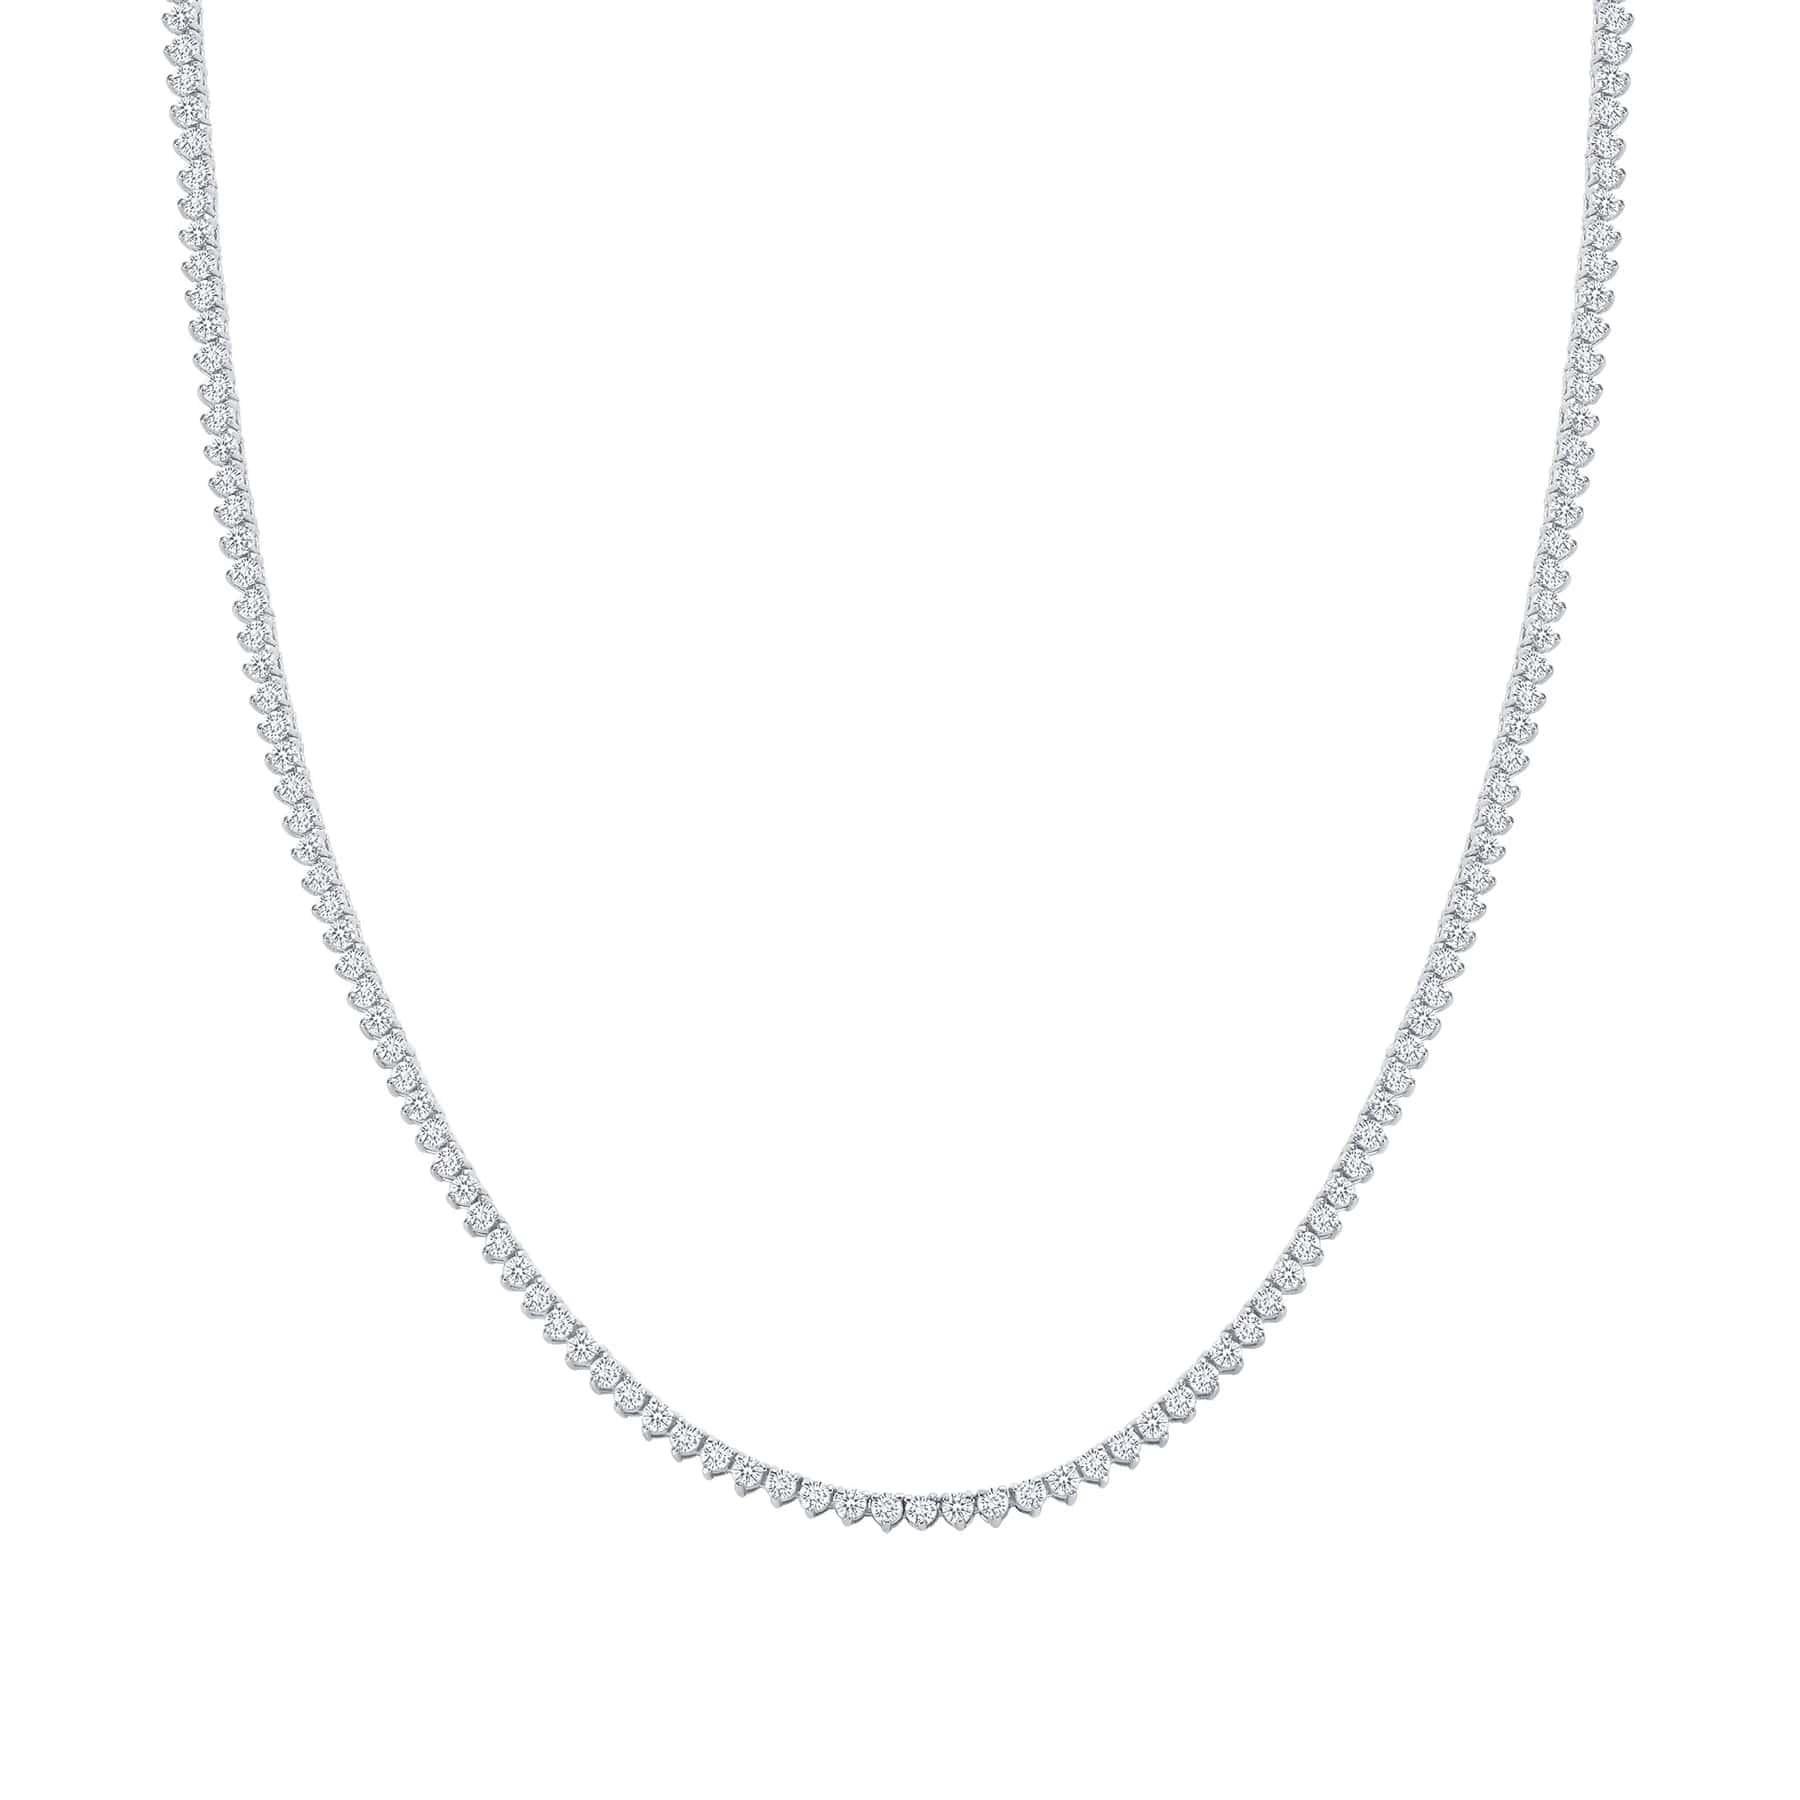 Round Cut Diamond Tennis Necklace - Three Prong For Sale